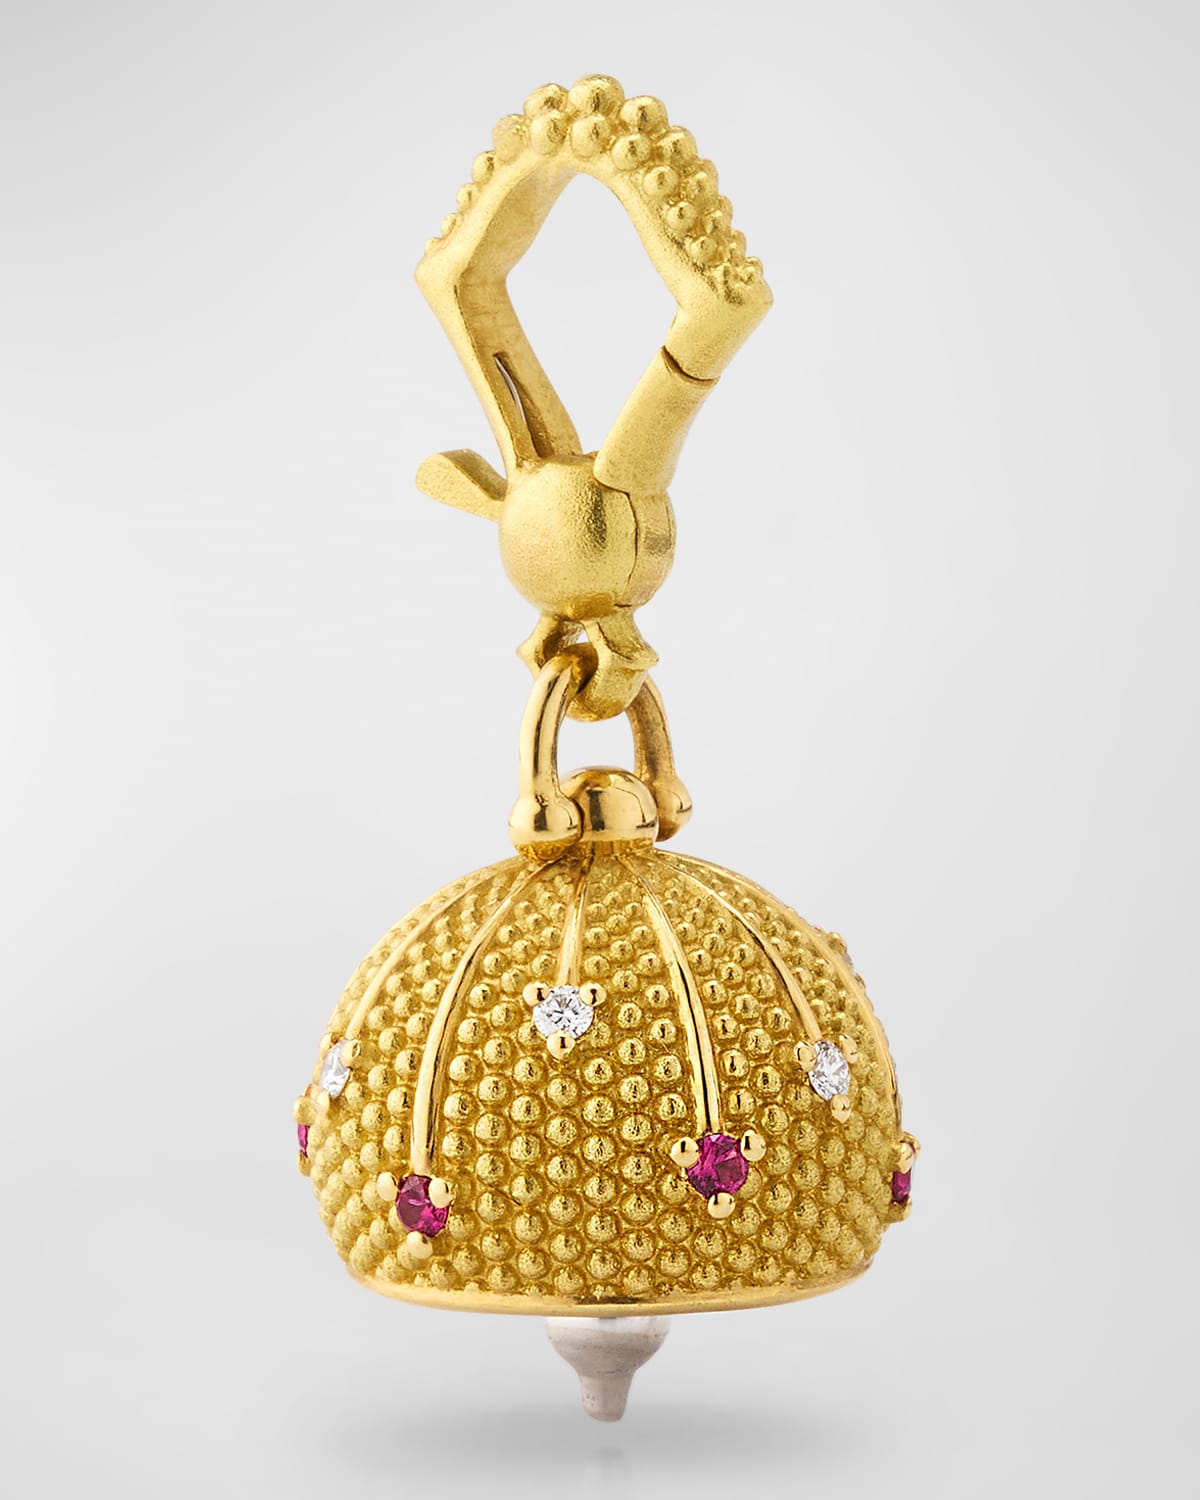 Yellow Gold Sequence Bell with Diamonds and Rubies